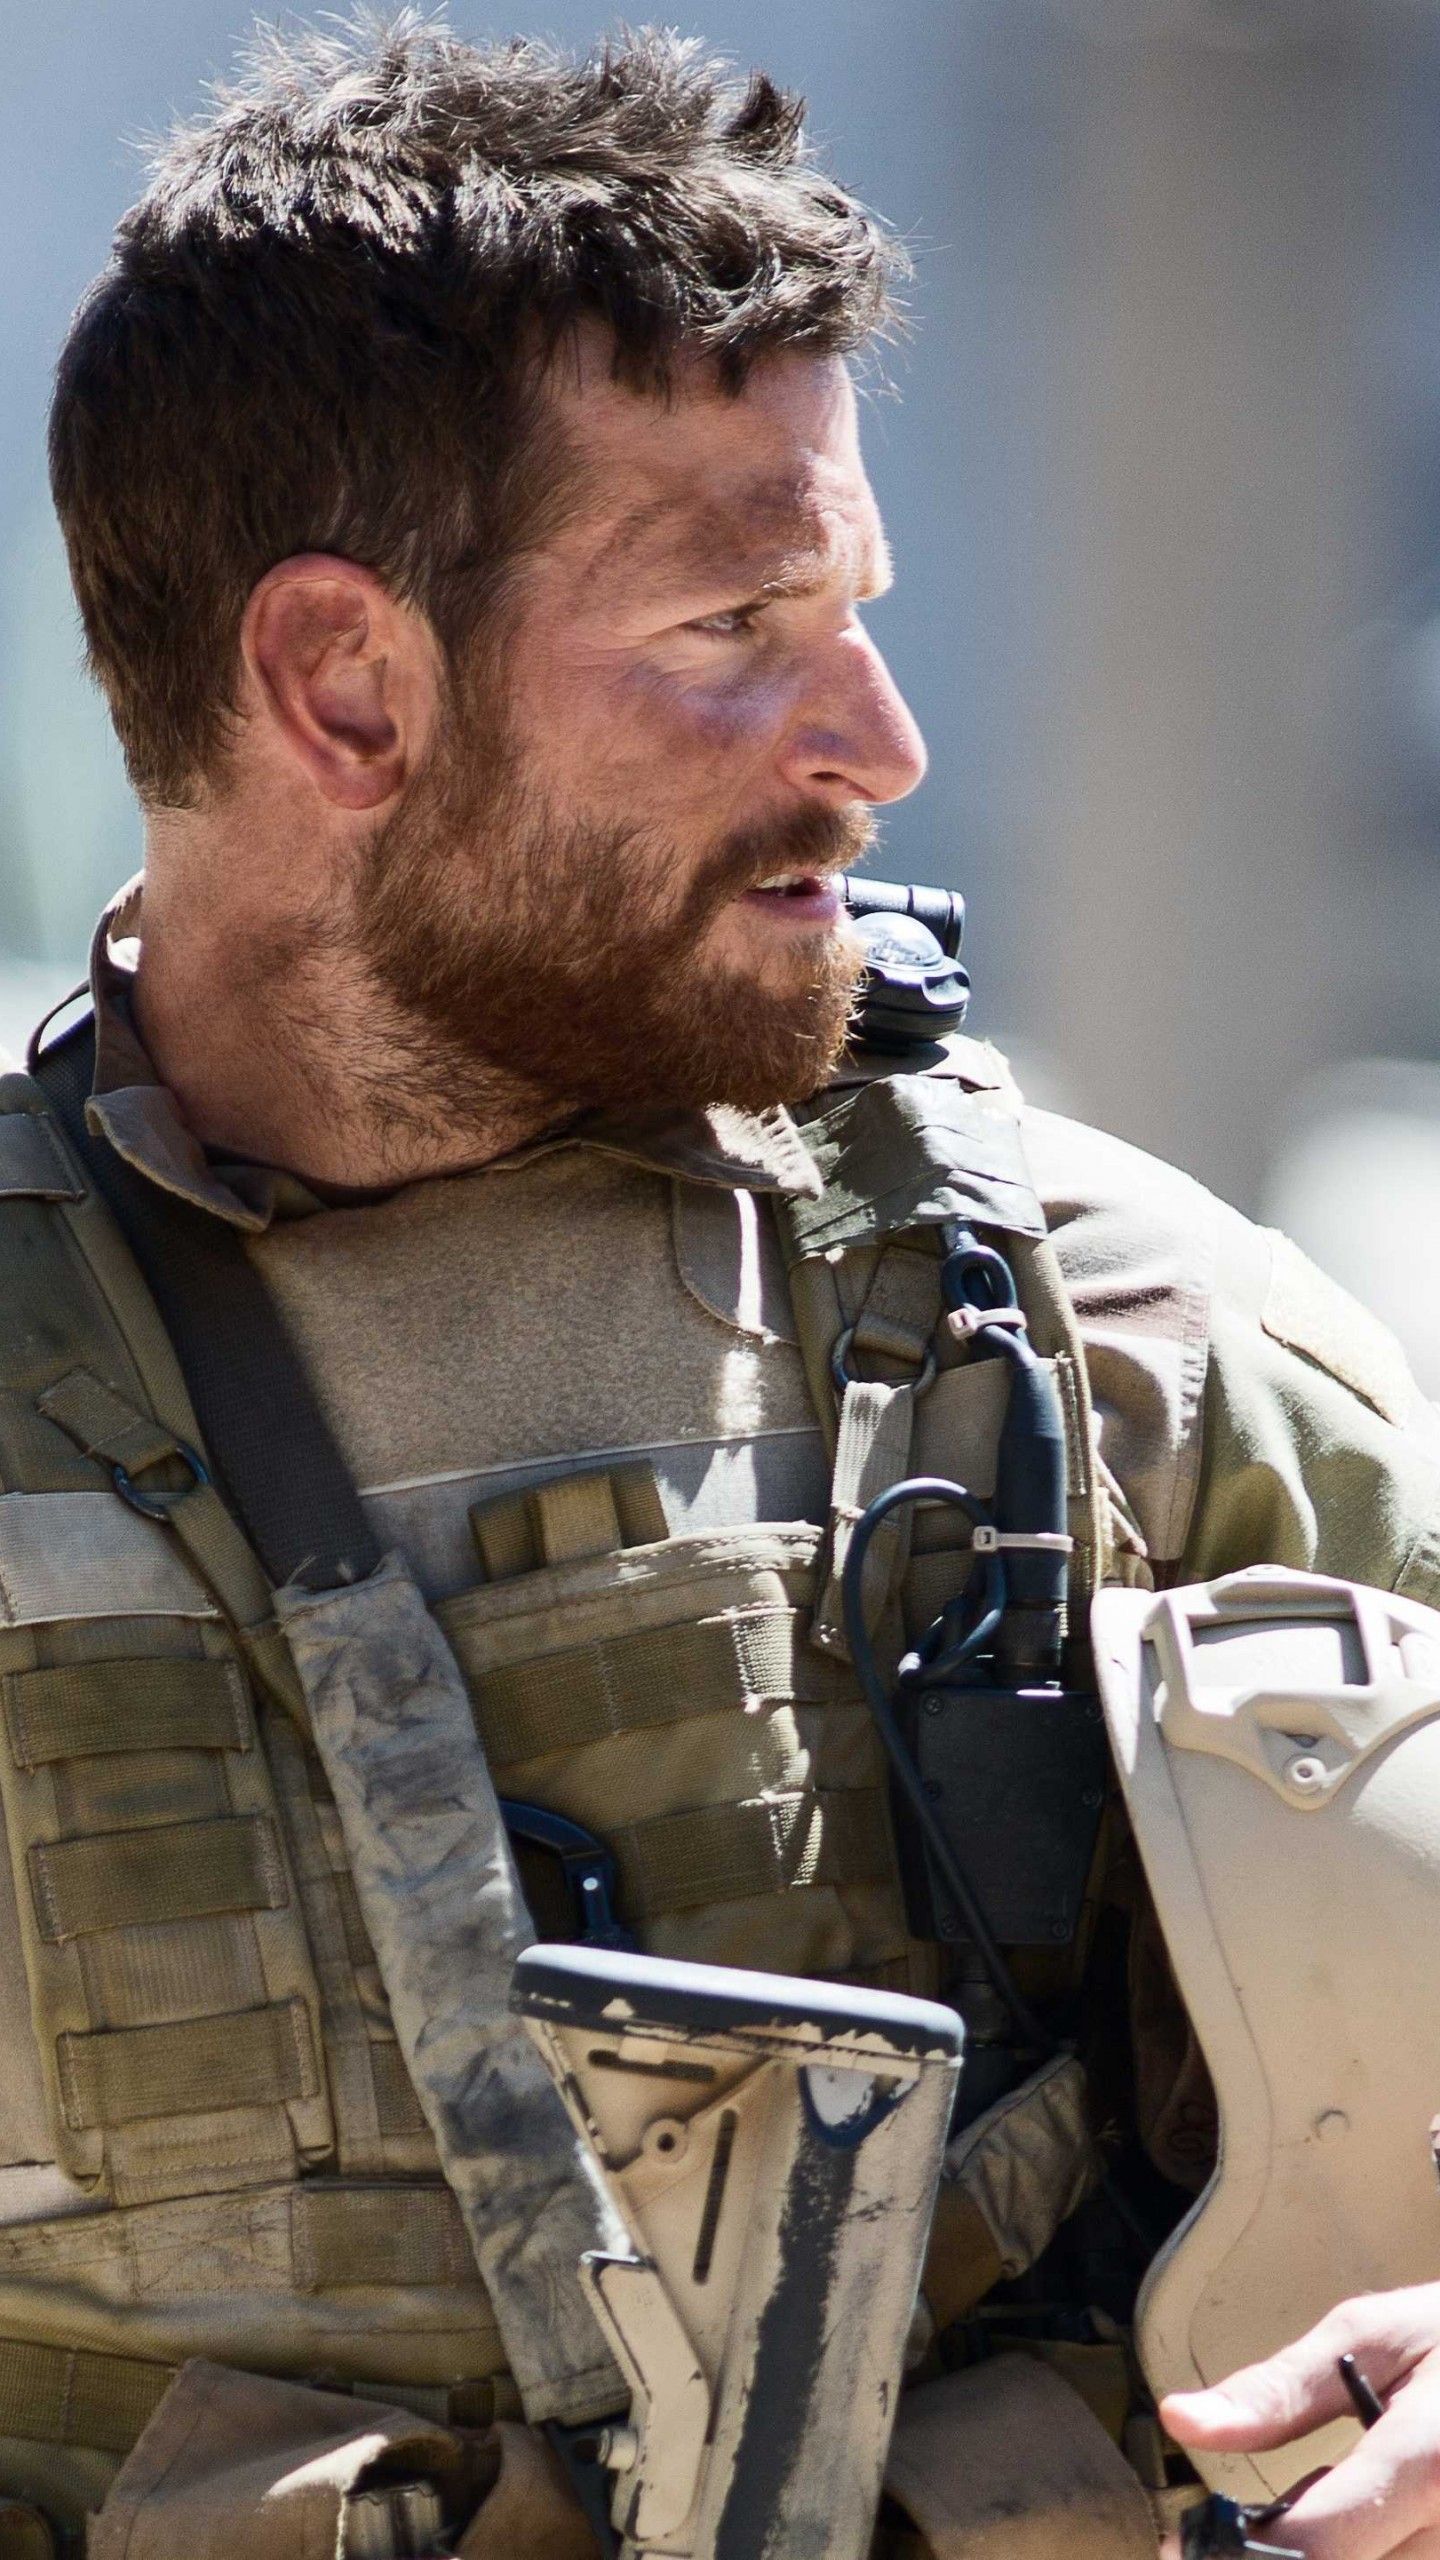 Wallpaper American Sniper, Best Movies of Chris Kyle, Academy Awards, Bradley Cooper, biographical, Sienna Miller, US Army, USA, war, Movies